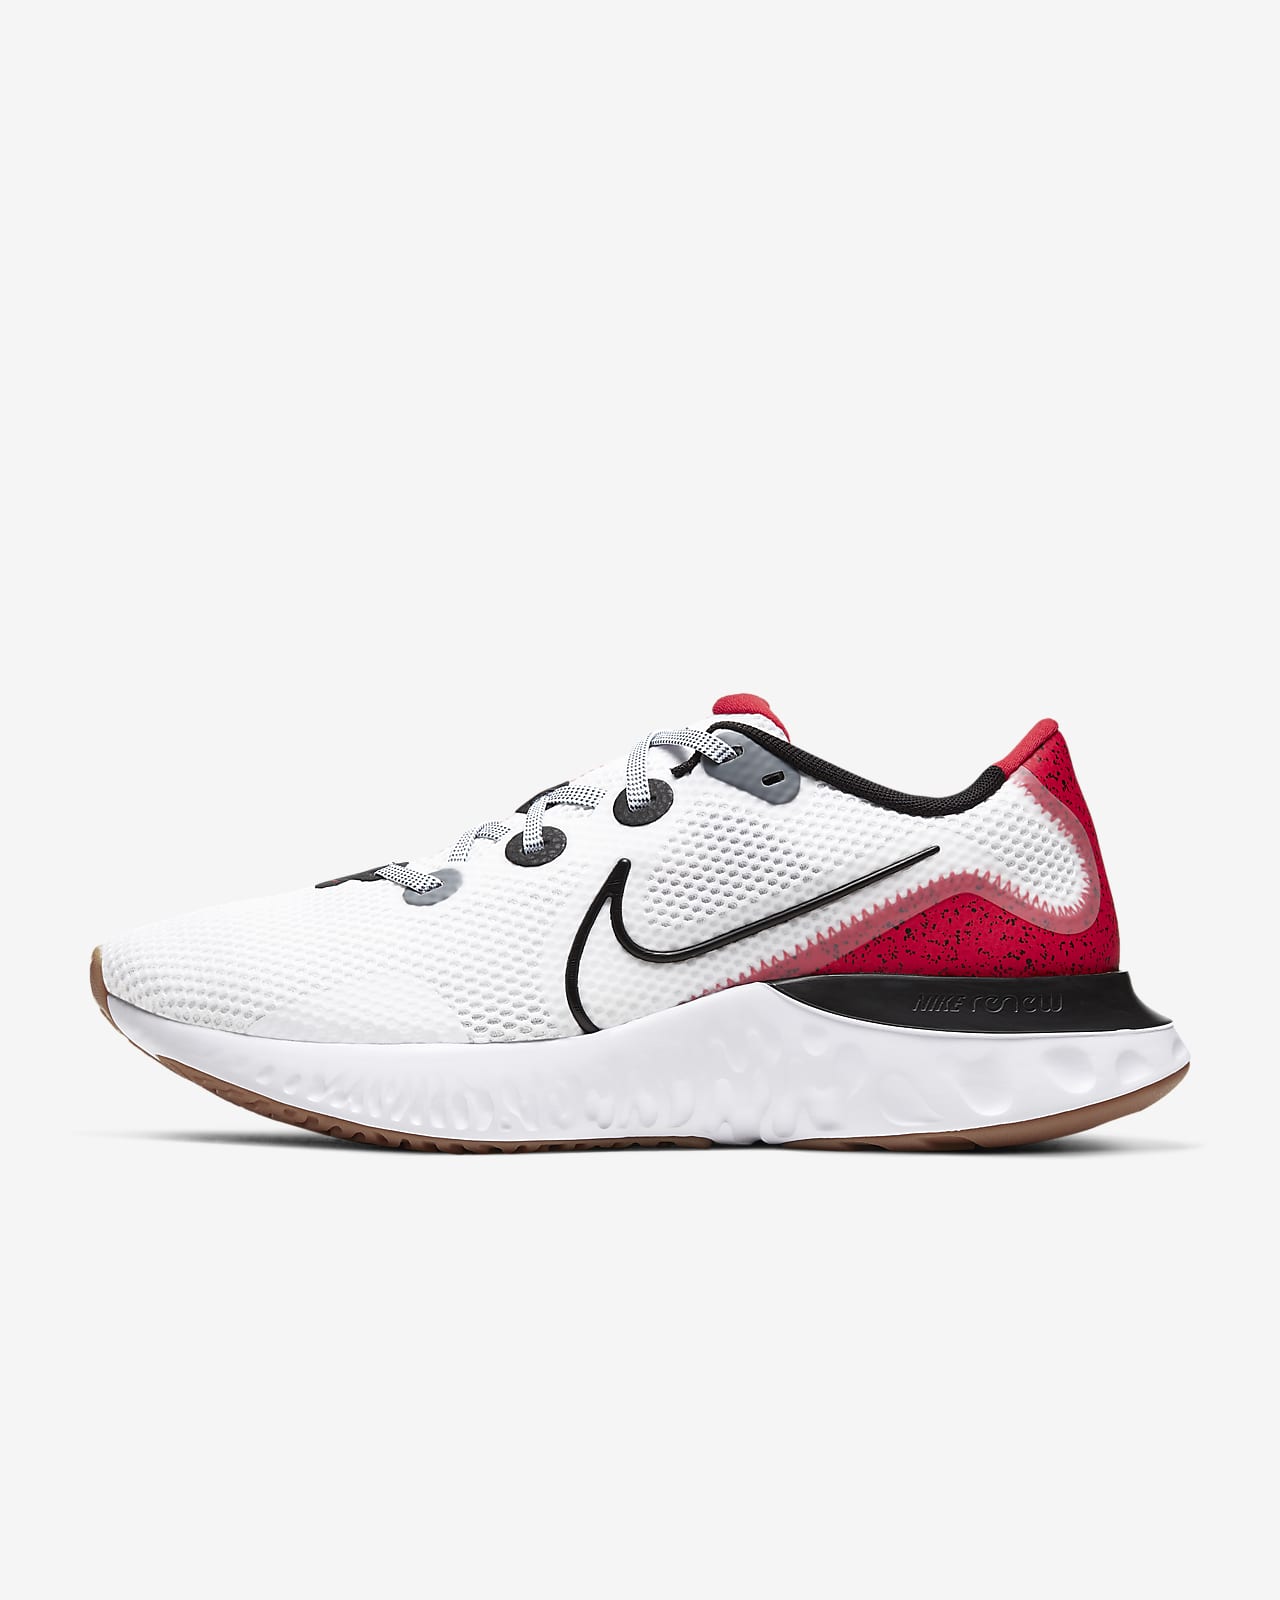 nike running red shoes